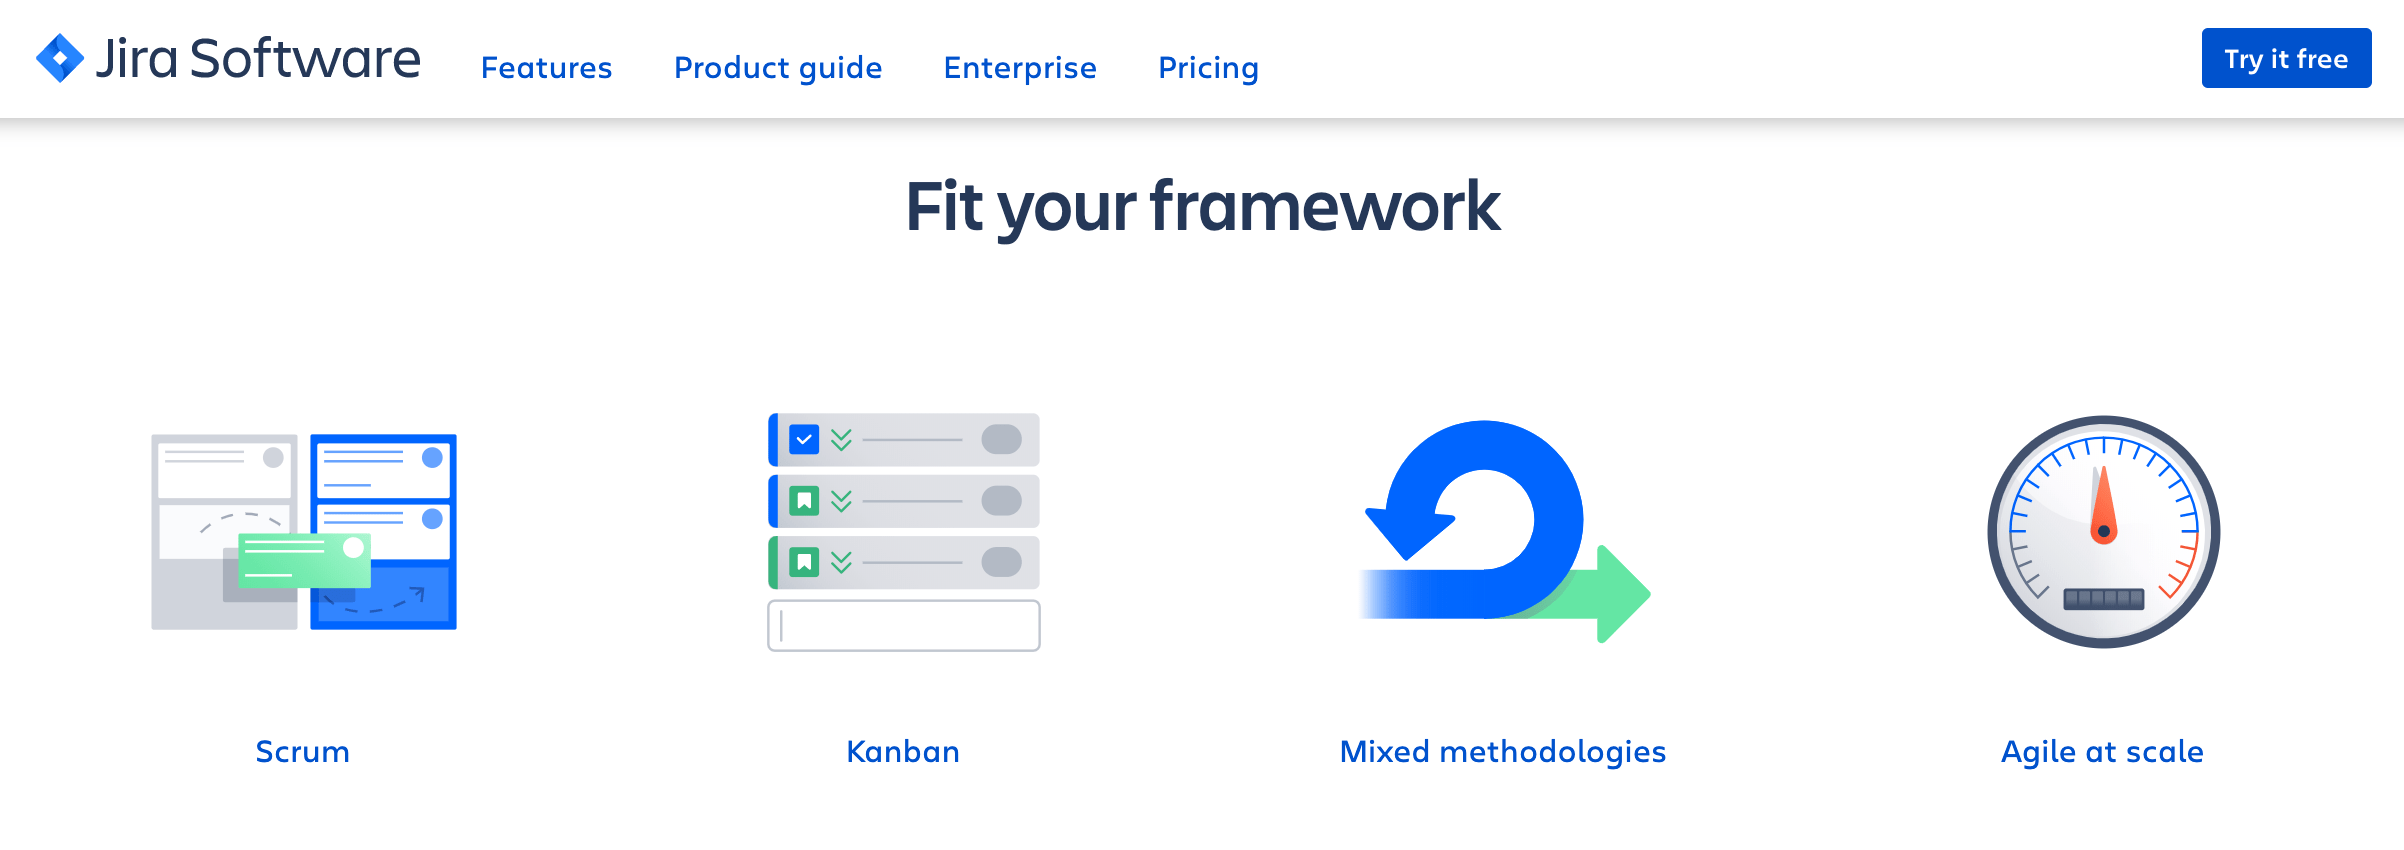 Jira Software agile project management tool fit your framework example.